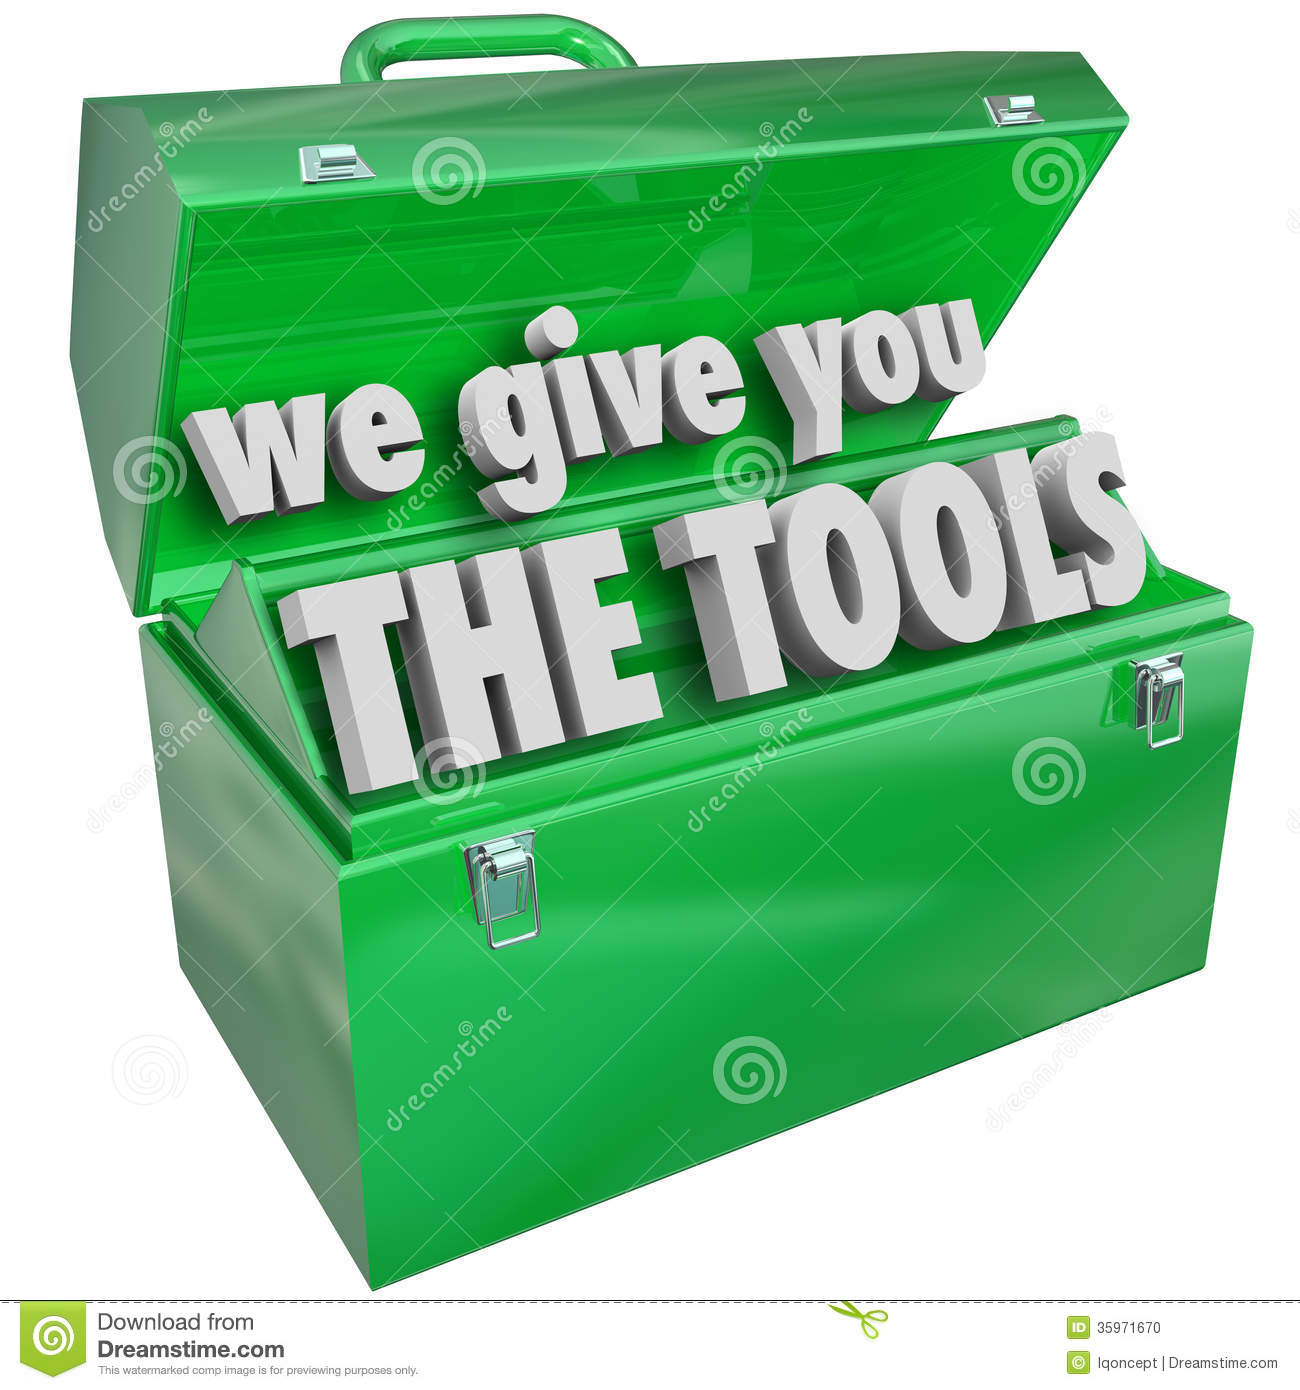 The Tools Green Metal Toolbox Words To Illustrate Skills And Training